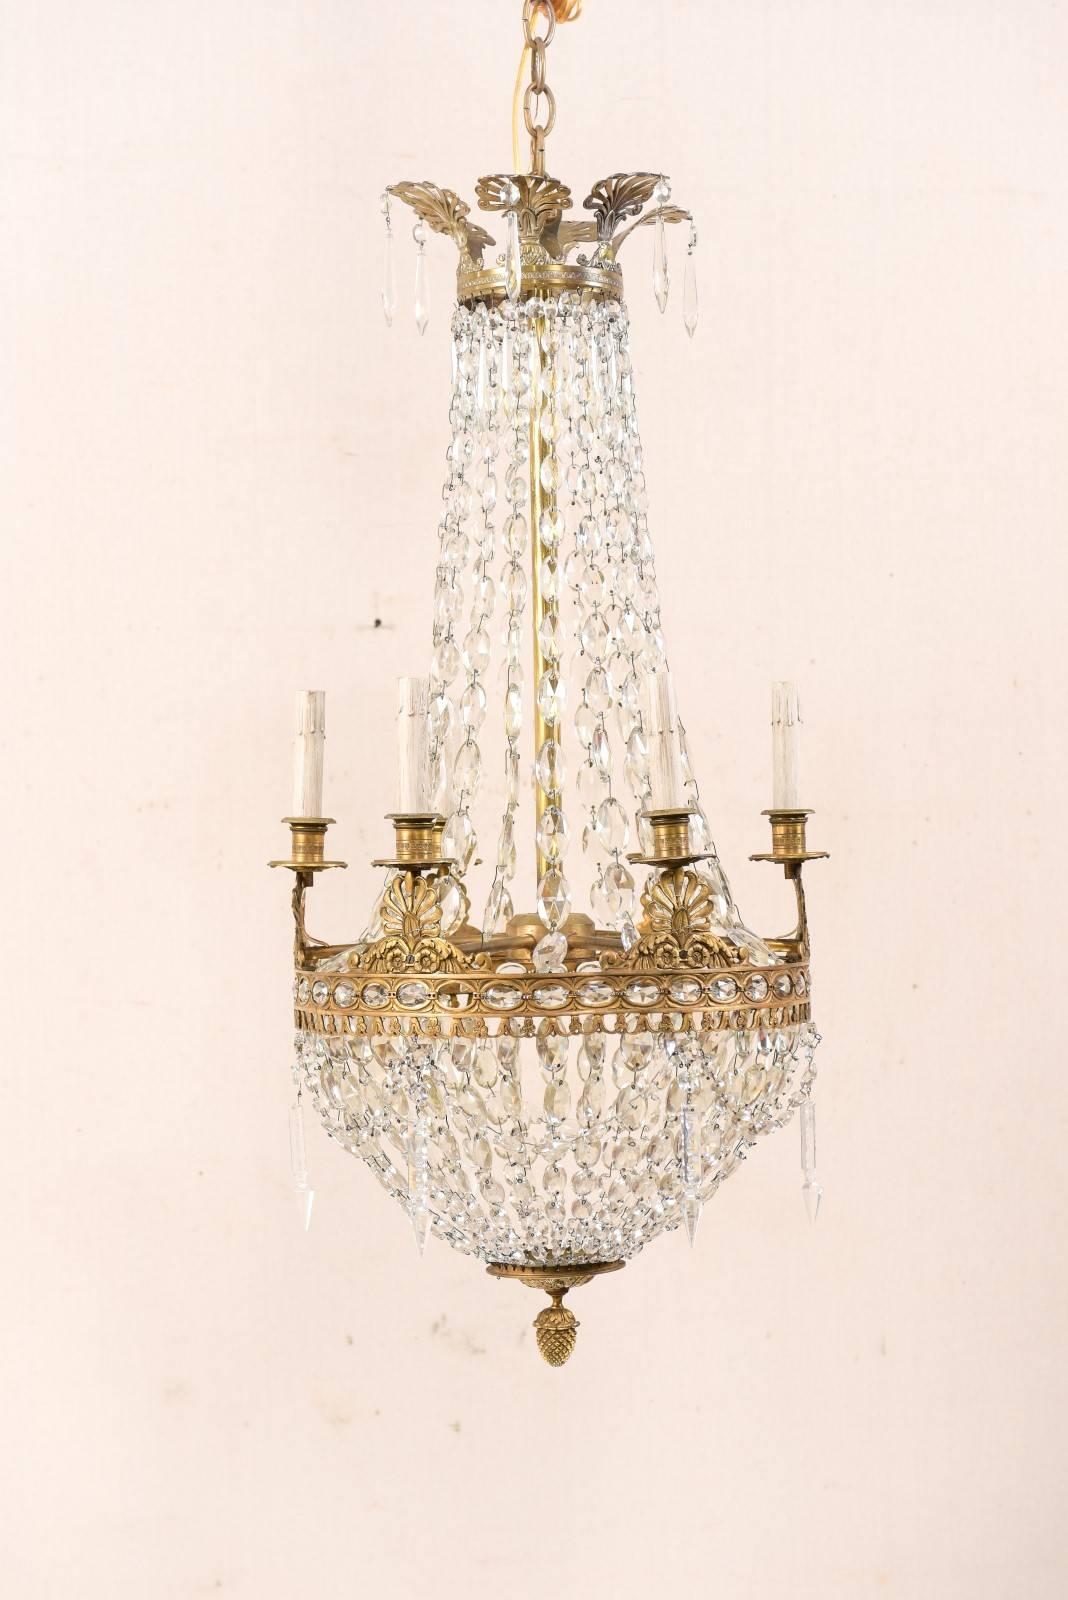 An elegant Italian mid-20th century six-light crystal basket chandelier. This vintage chandelier from Italy features a basket design shape decorated in strands of crystals, draped throughout the body. The upper brass corona with anthemia projects